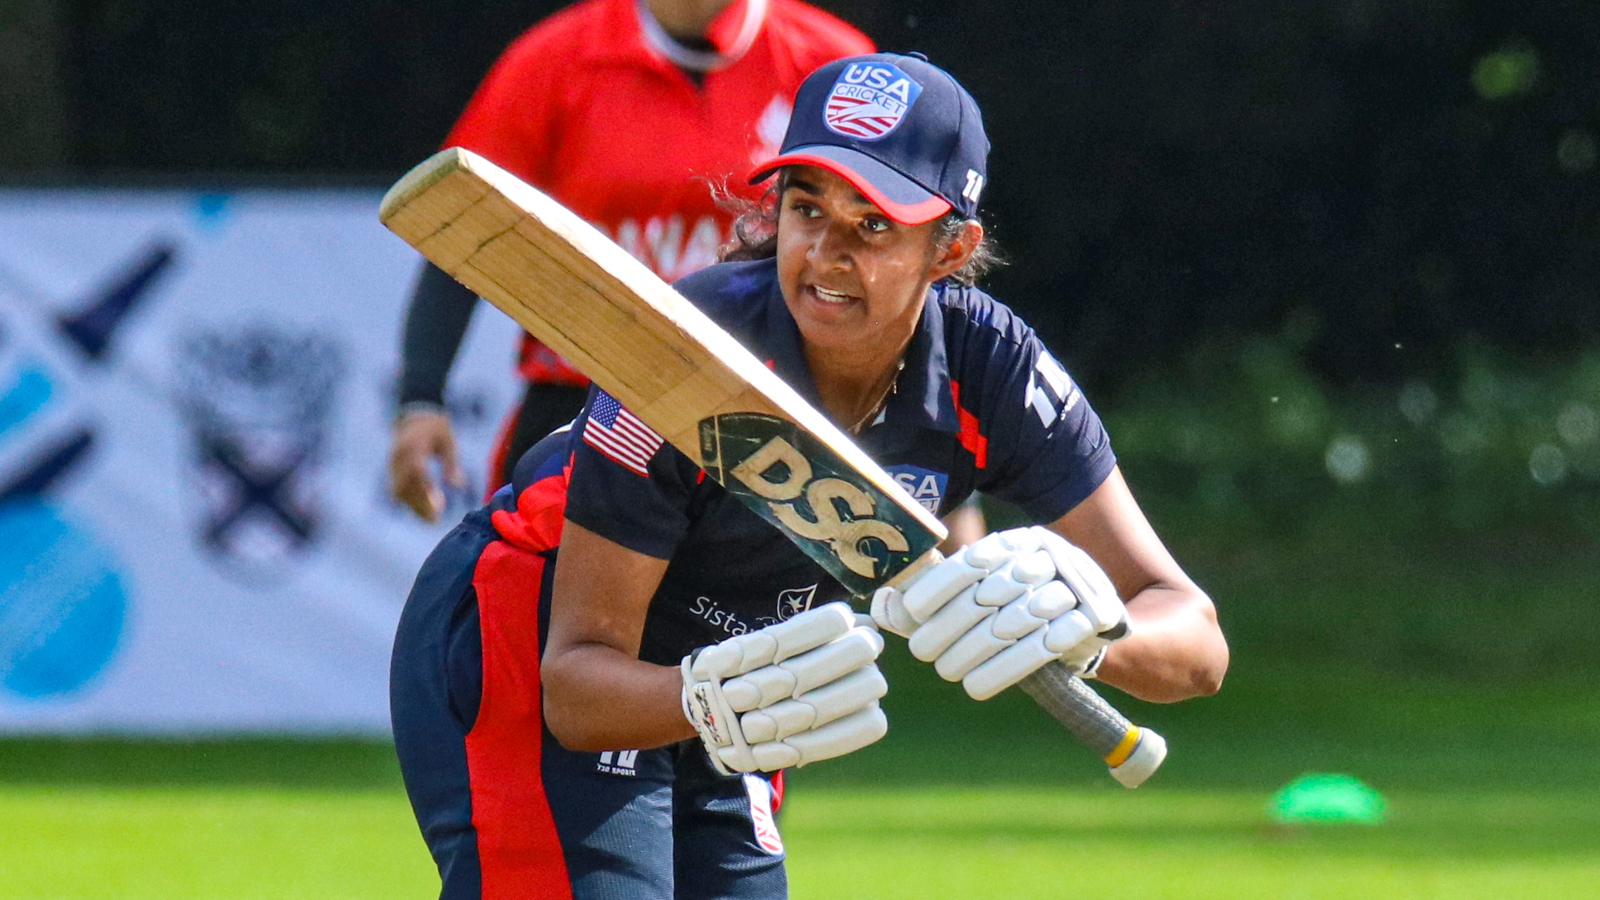 Game 2 vs Canada at 2021 ICC Women’s T20 World Cup Americas Qualifier